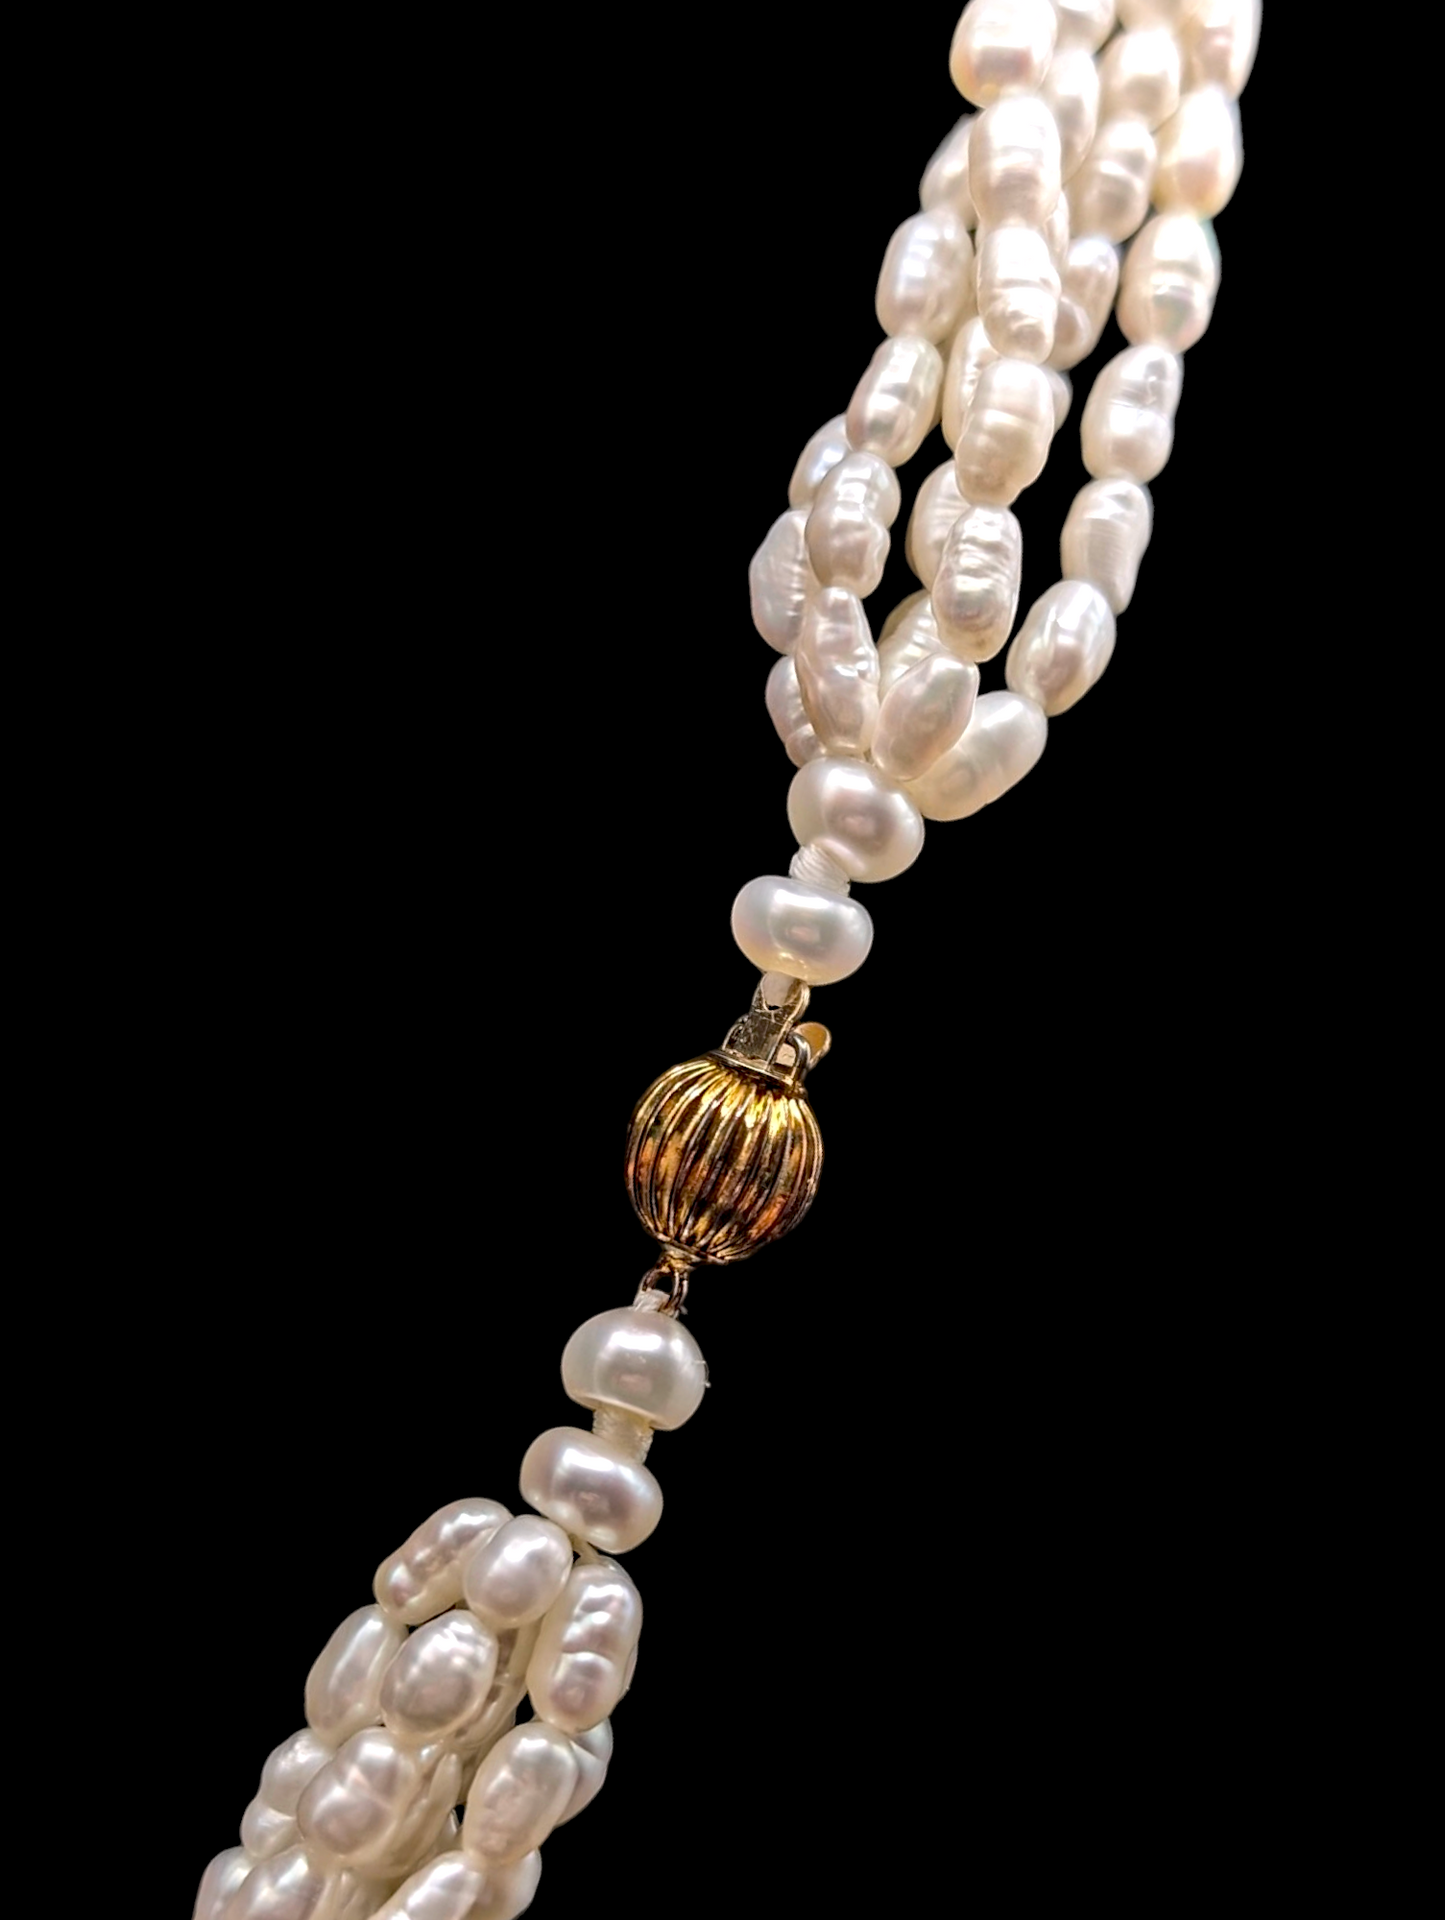 Vintage 5 Strand Genuine Baroque Fresh Water Pearl Necklace with Sterling Silver Beads